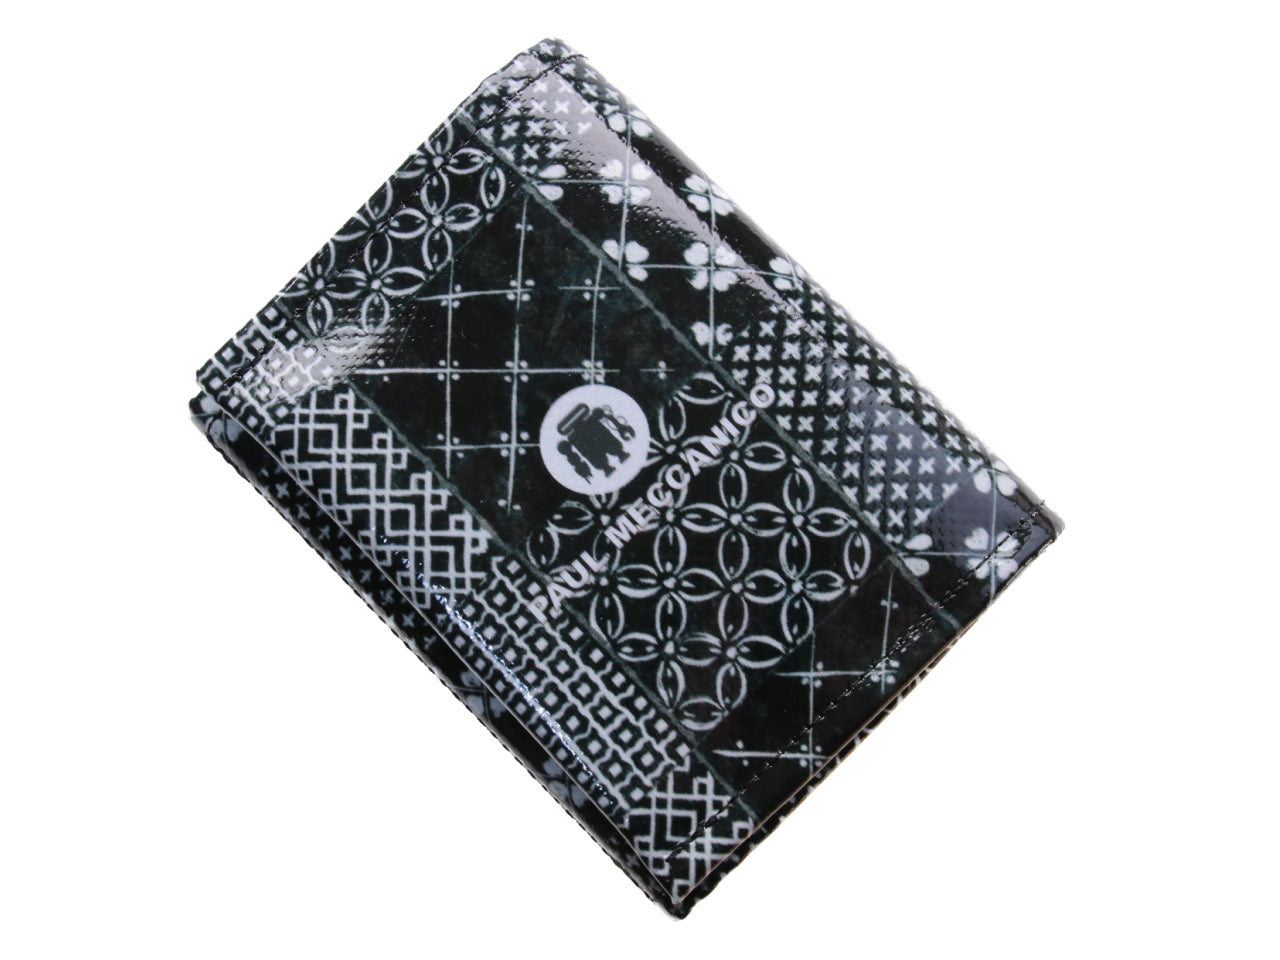 BLACK AND WHITE WOMEN'S WALLET "EMBROIDERY STYLE". MODEL TREK MADE OF LORRY TARPAULIN. - Limited Edition Paul Meccanico